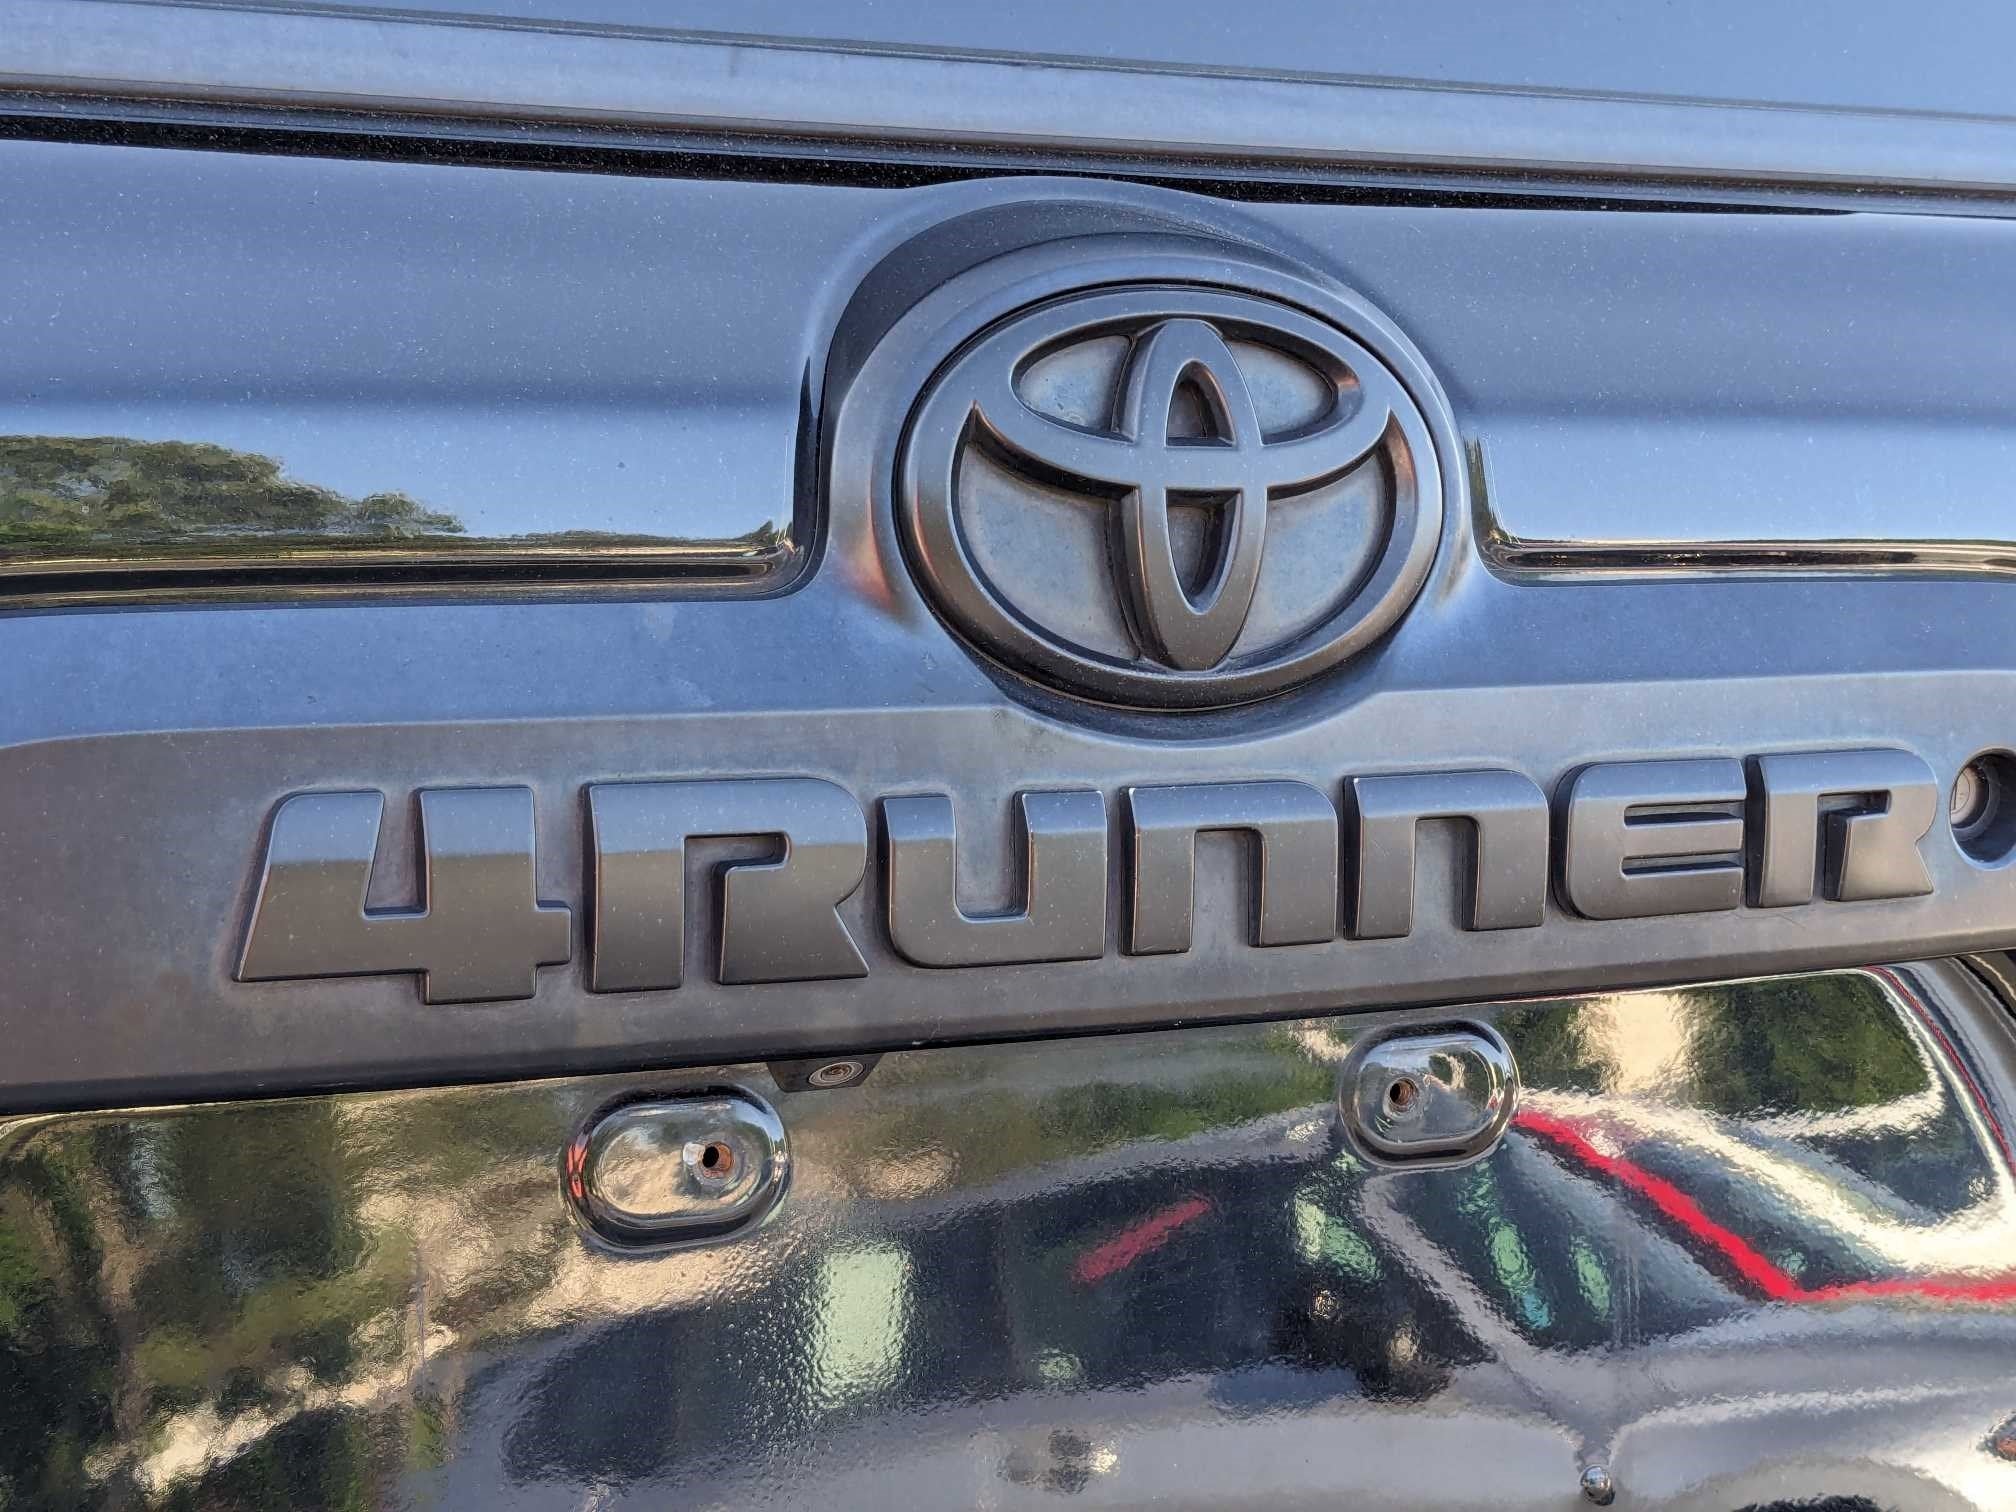 2018 Toyota 4Runner TRD Off Road 4WD